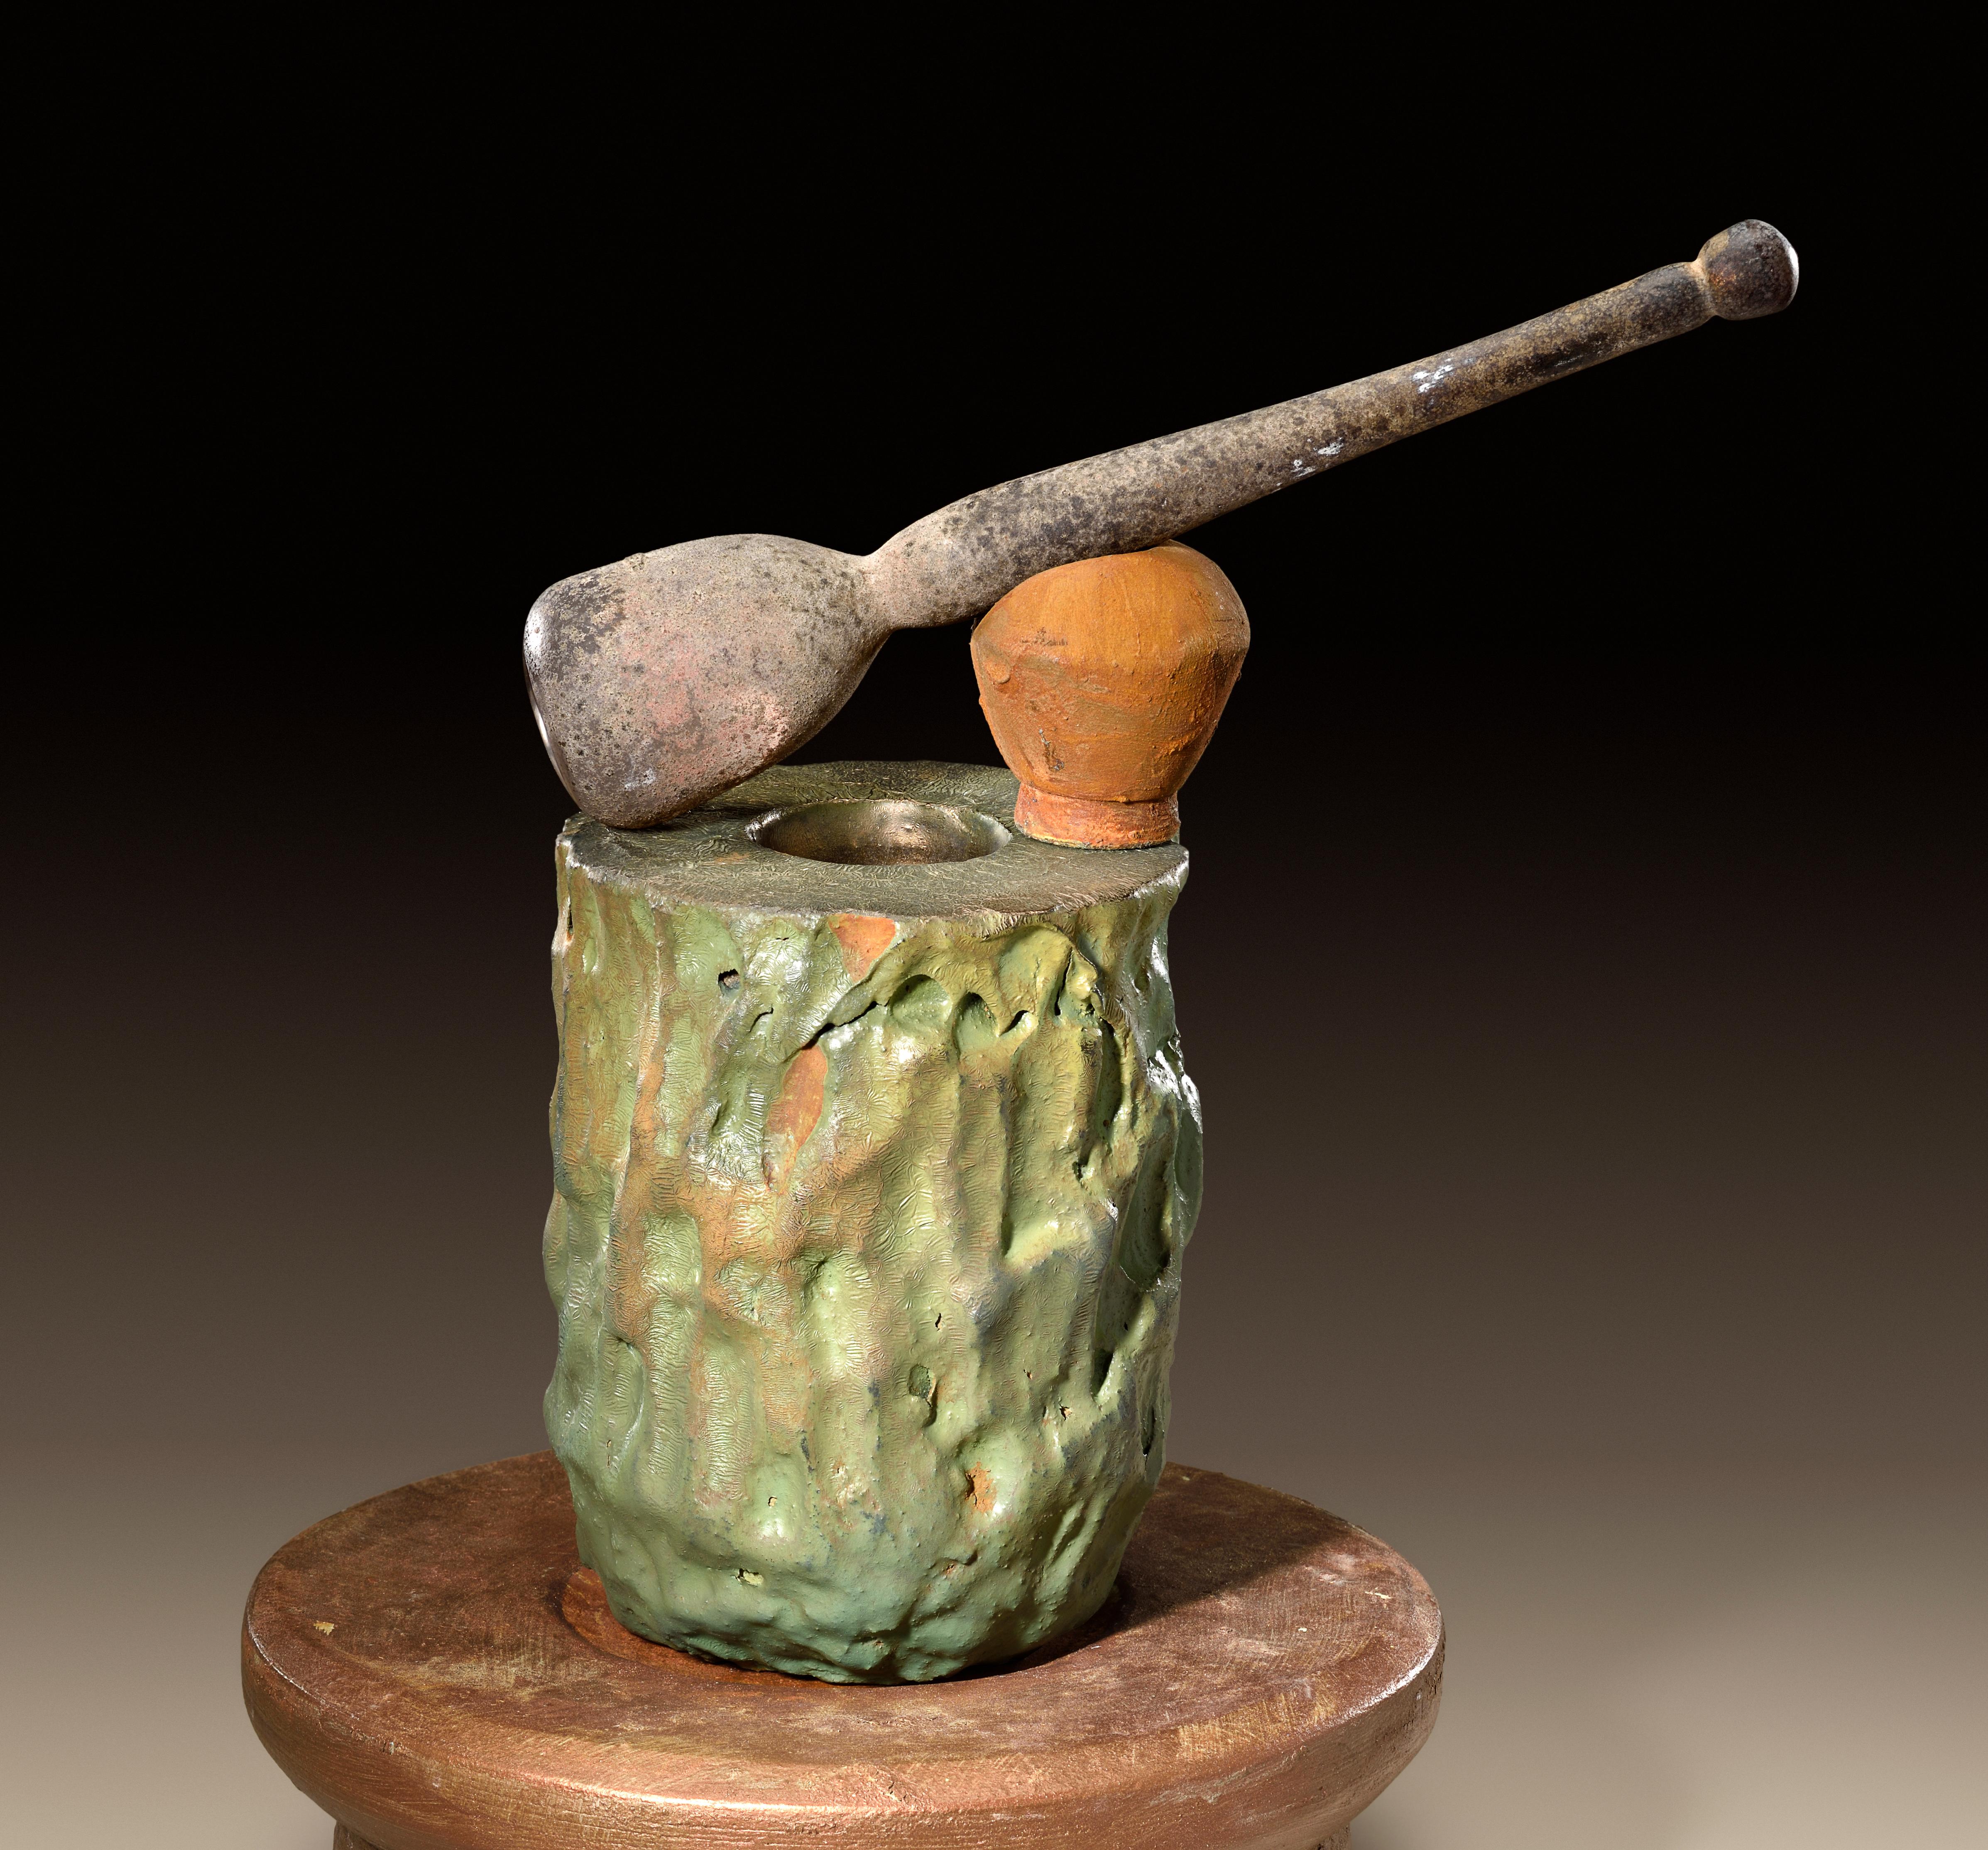 Fired Richard Hirsch Glazed Ceramic Crucible Sculpture with Blown Glass Pestle, 2018 For Sale